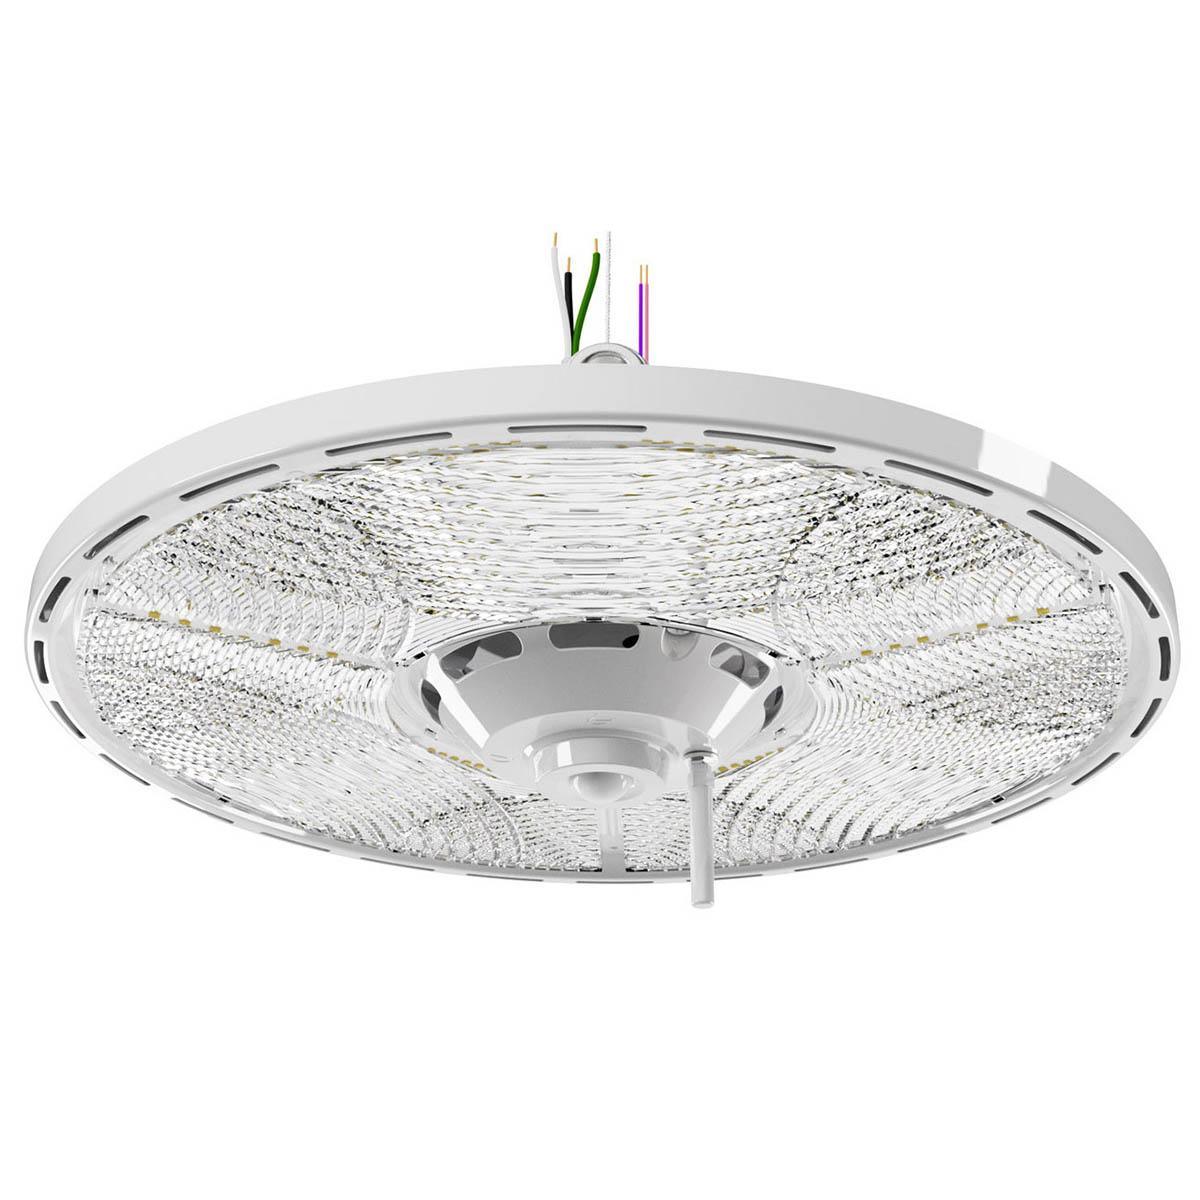 Compact Pro Industrial LED Round High Bay, Selectable 27000 Lumens, 4000K/5000K CCT, 120-347V, White